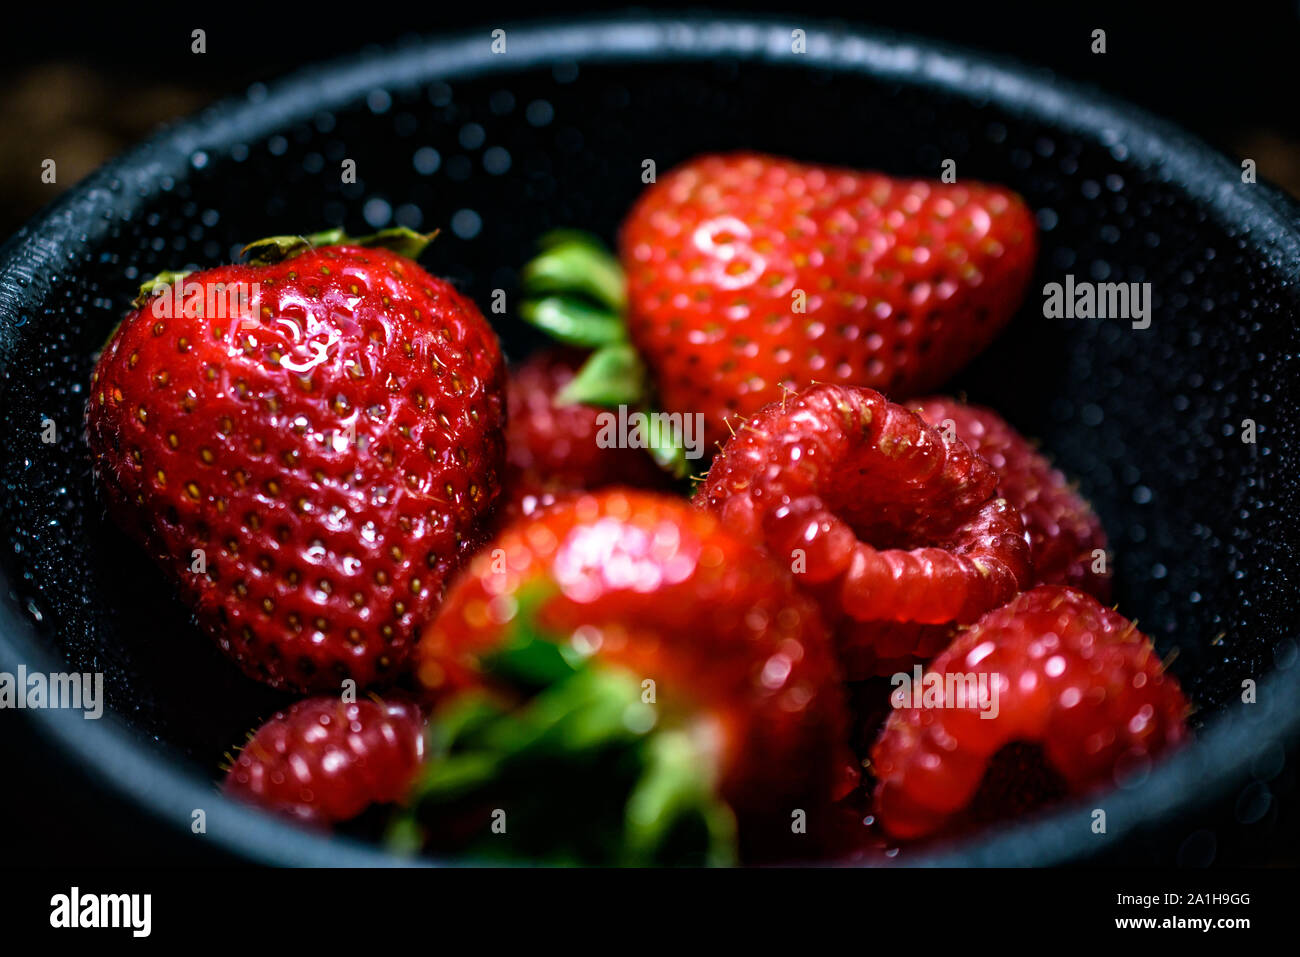 Closeup of Bowl of Mixed Juicy Red Ripe Strawberries and Raspberries Stock Photo